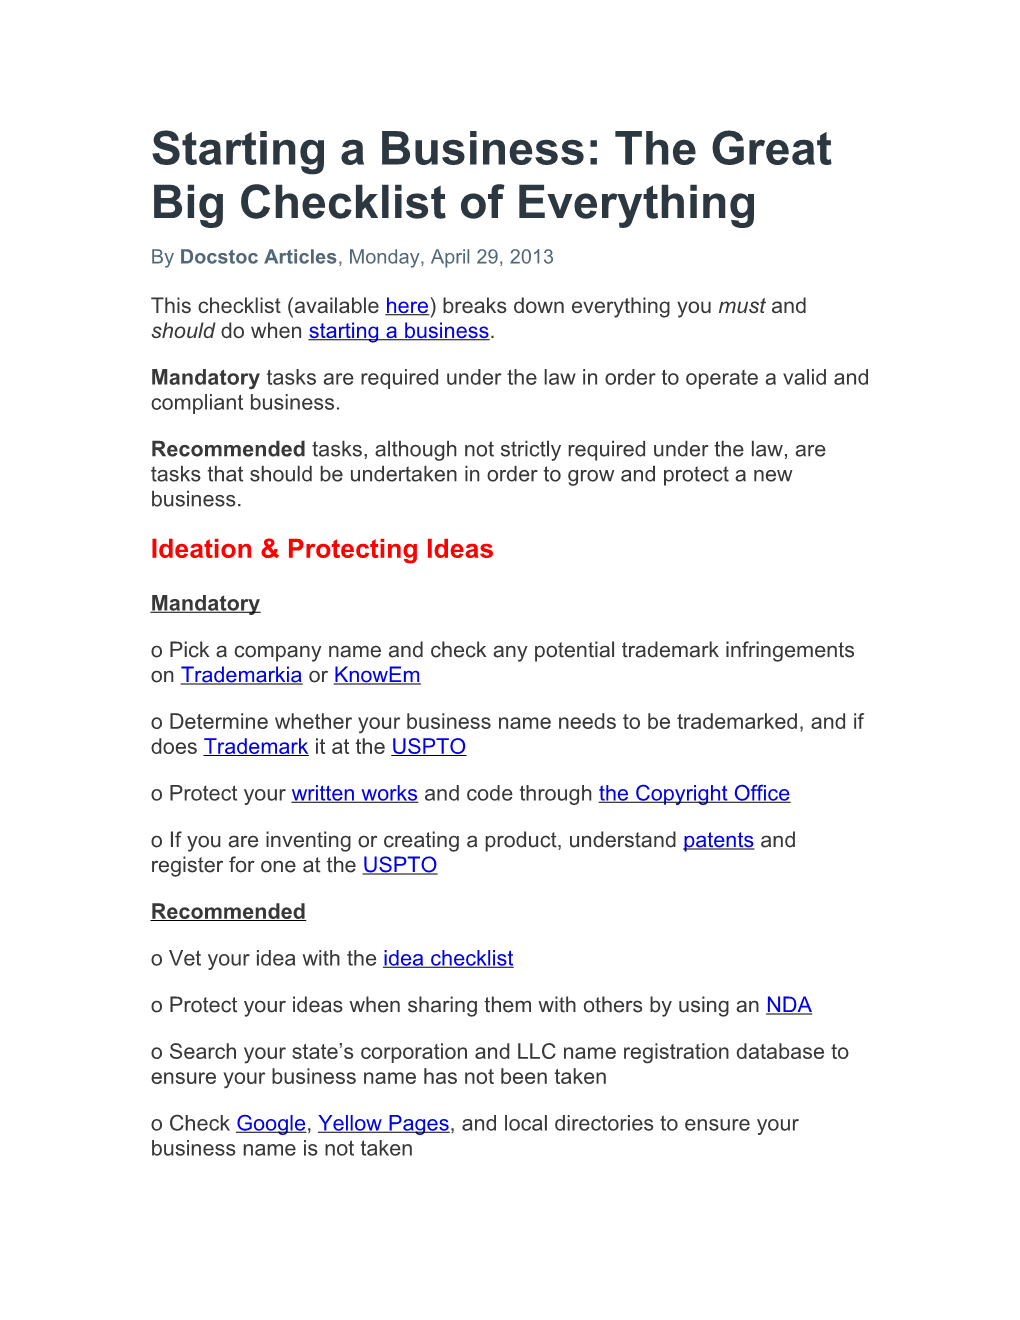 Starting a Business: the Great Big Checklist of Everything